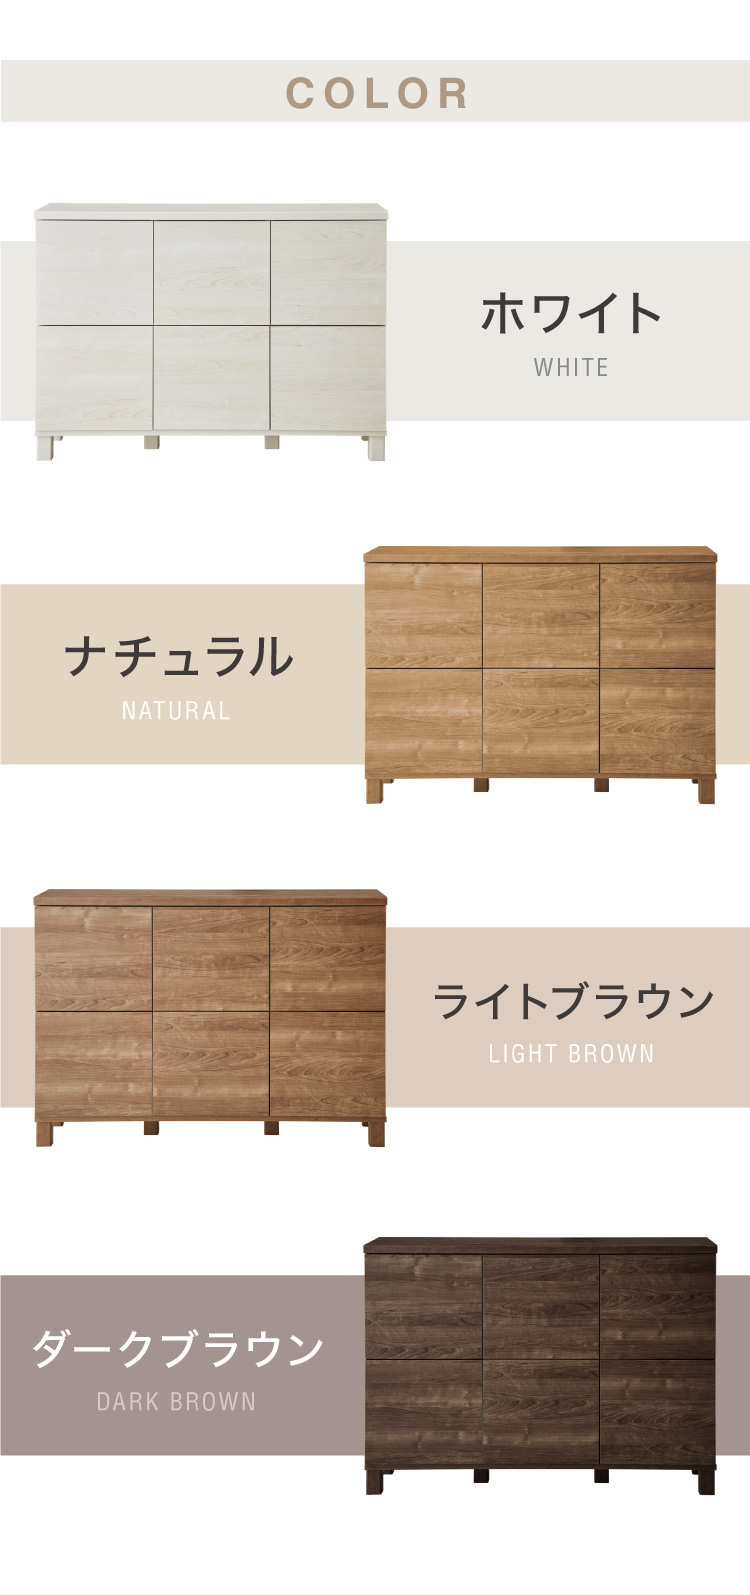  made in Japan cabinet sideboard slim push type door multi cabinet width put 2 step counter under storage bookshelf bookcase shelves door BOX color box payment on delivery un- possible 